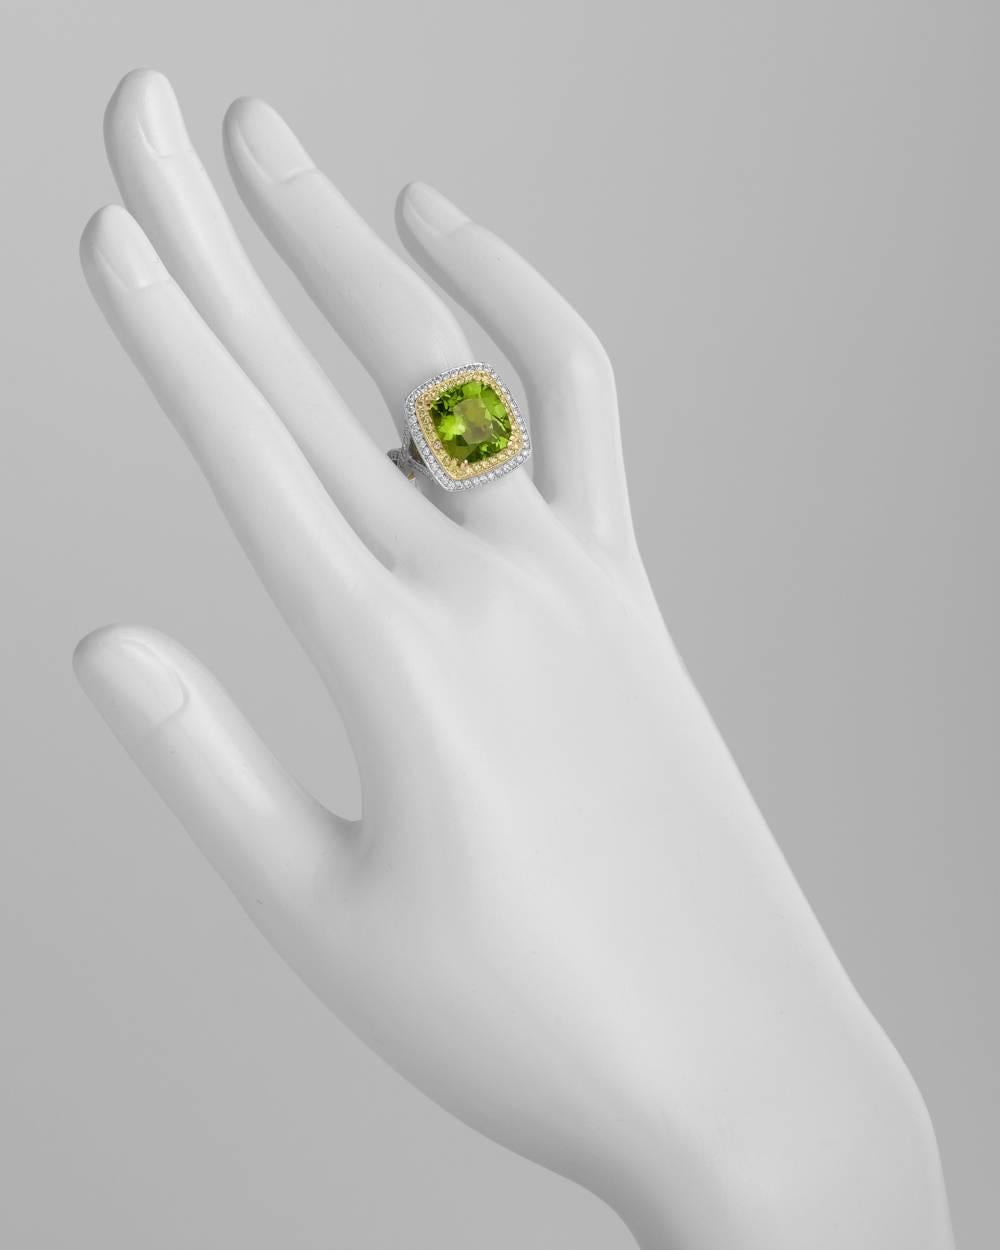 Cocktail ring, centering a cushion-shaped peridot weighing approximately 5.58 carats, within a two-tiered yellow and white diamond surround, with a pavé-set white diamond serpentine style band, the diamonds altogether weighing approximately 1.34